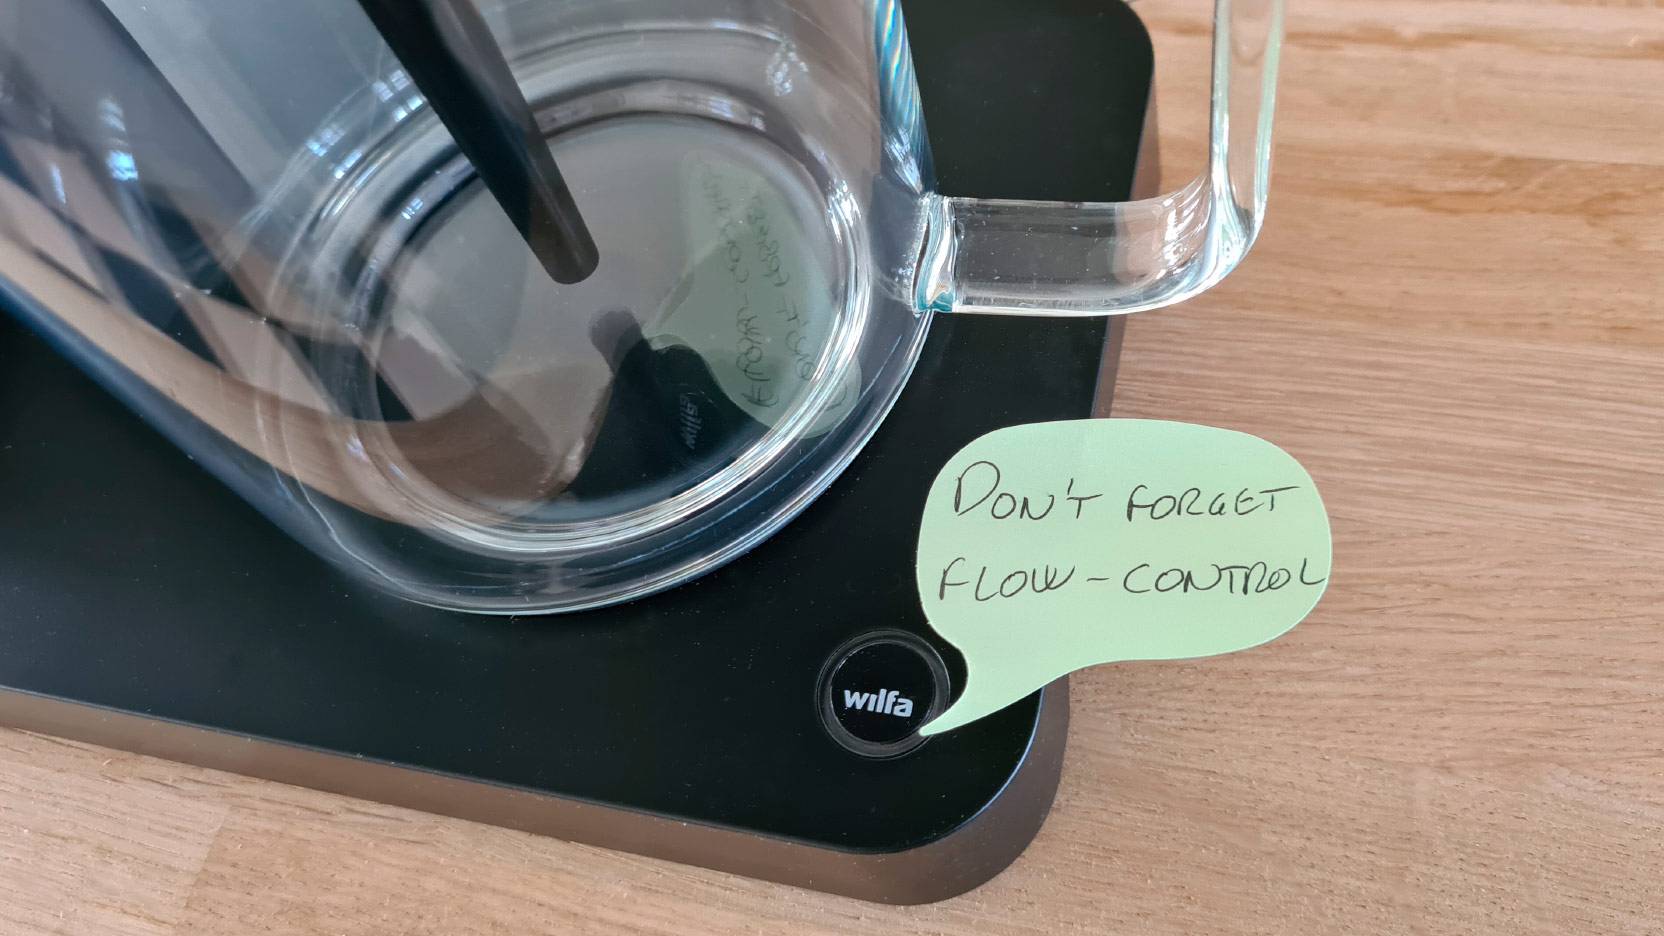 Image of our “Don’t forget the drip stop” post-it note on Wilfa Svart Performance WSPL-3B